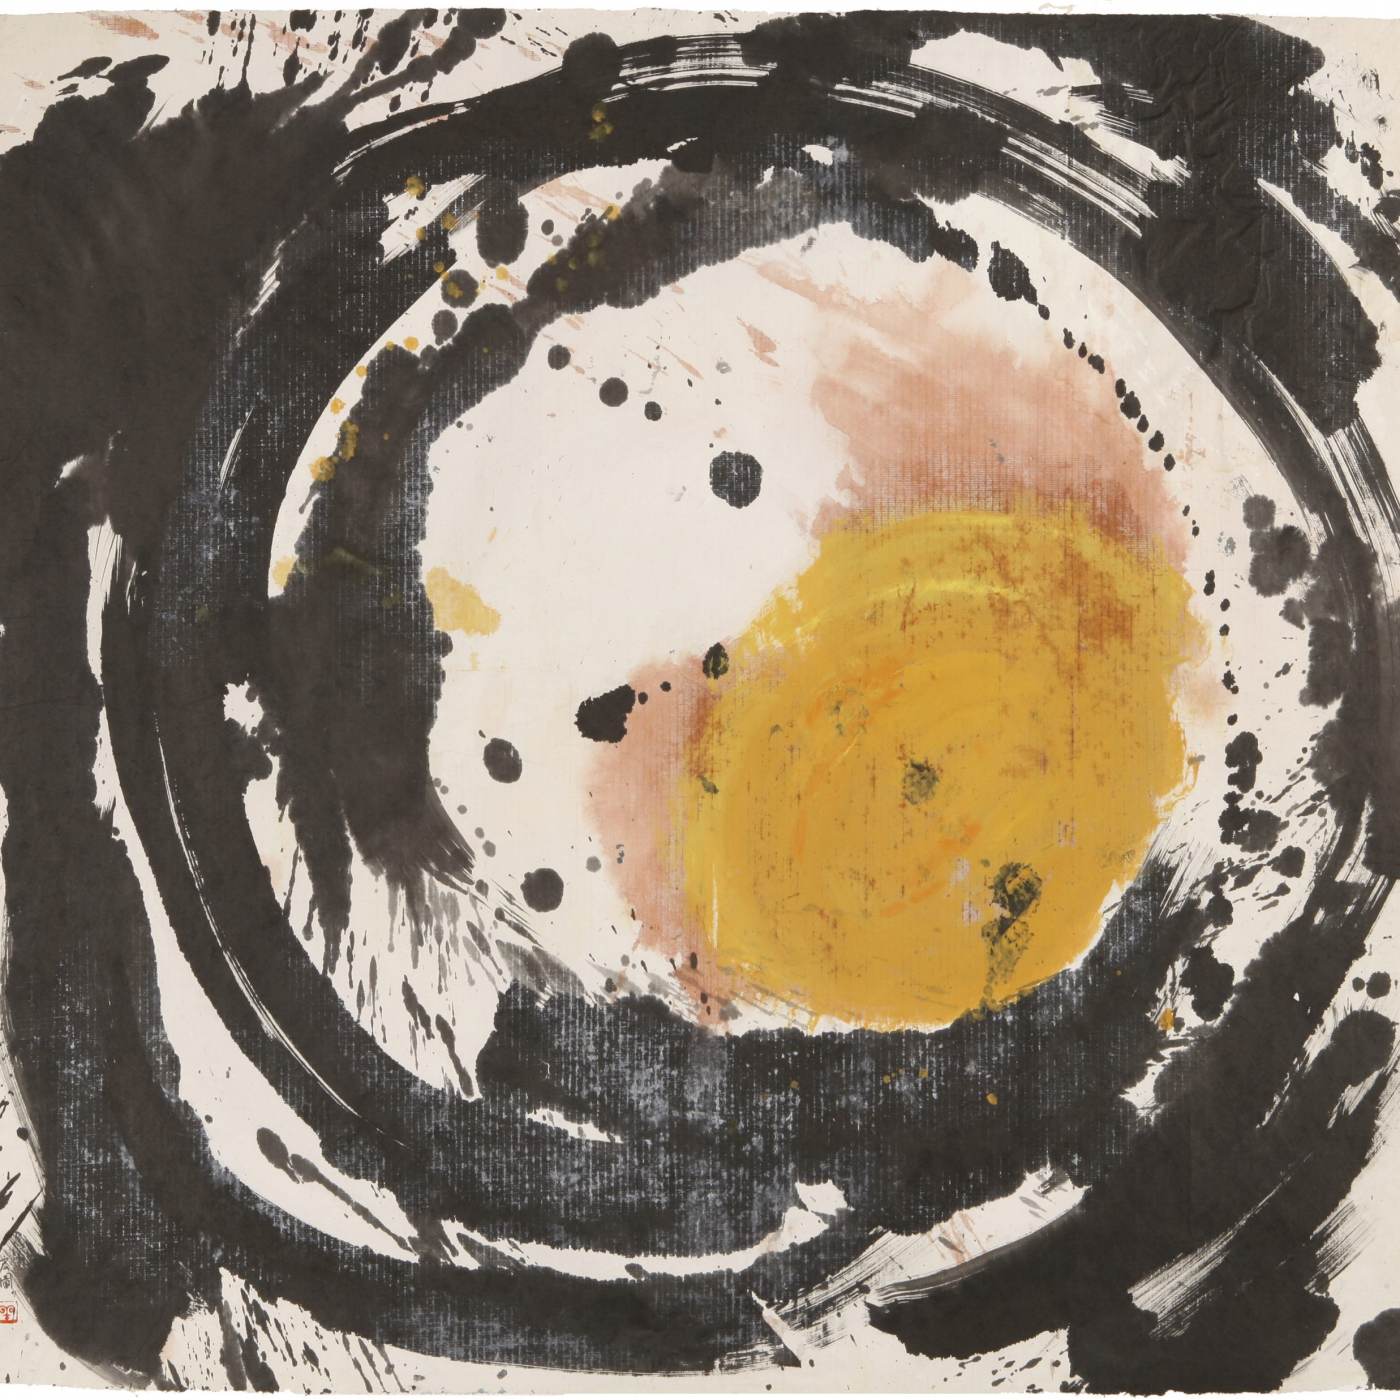 Zhang Hongtu, Story of One Circle, 1983, Ink, gouache and acrylic on rice paper, Courtesy of the artist